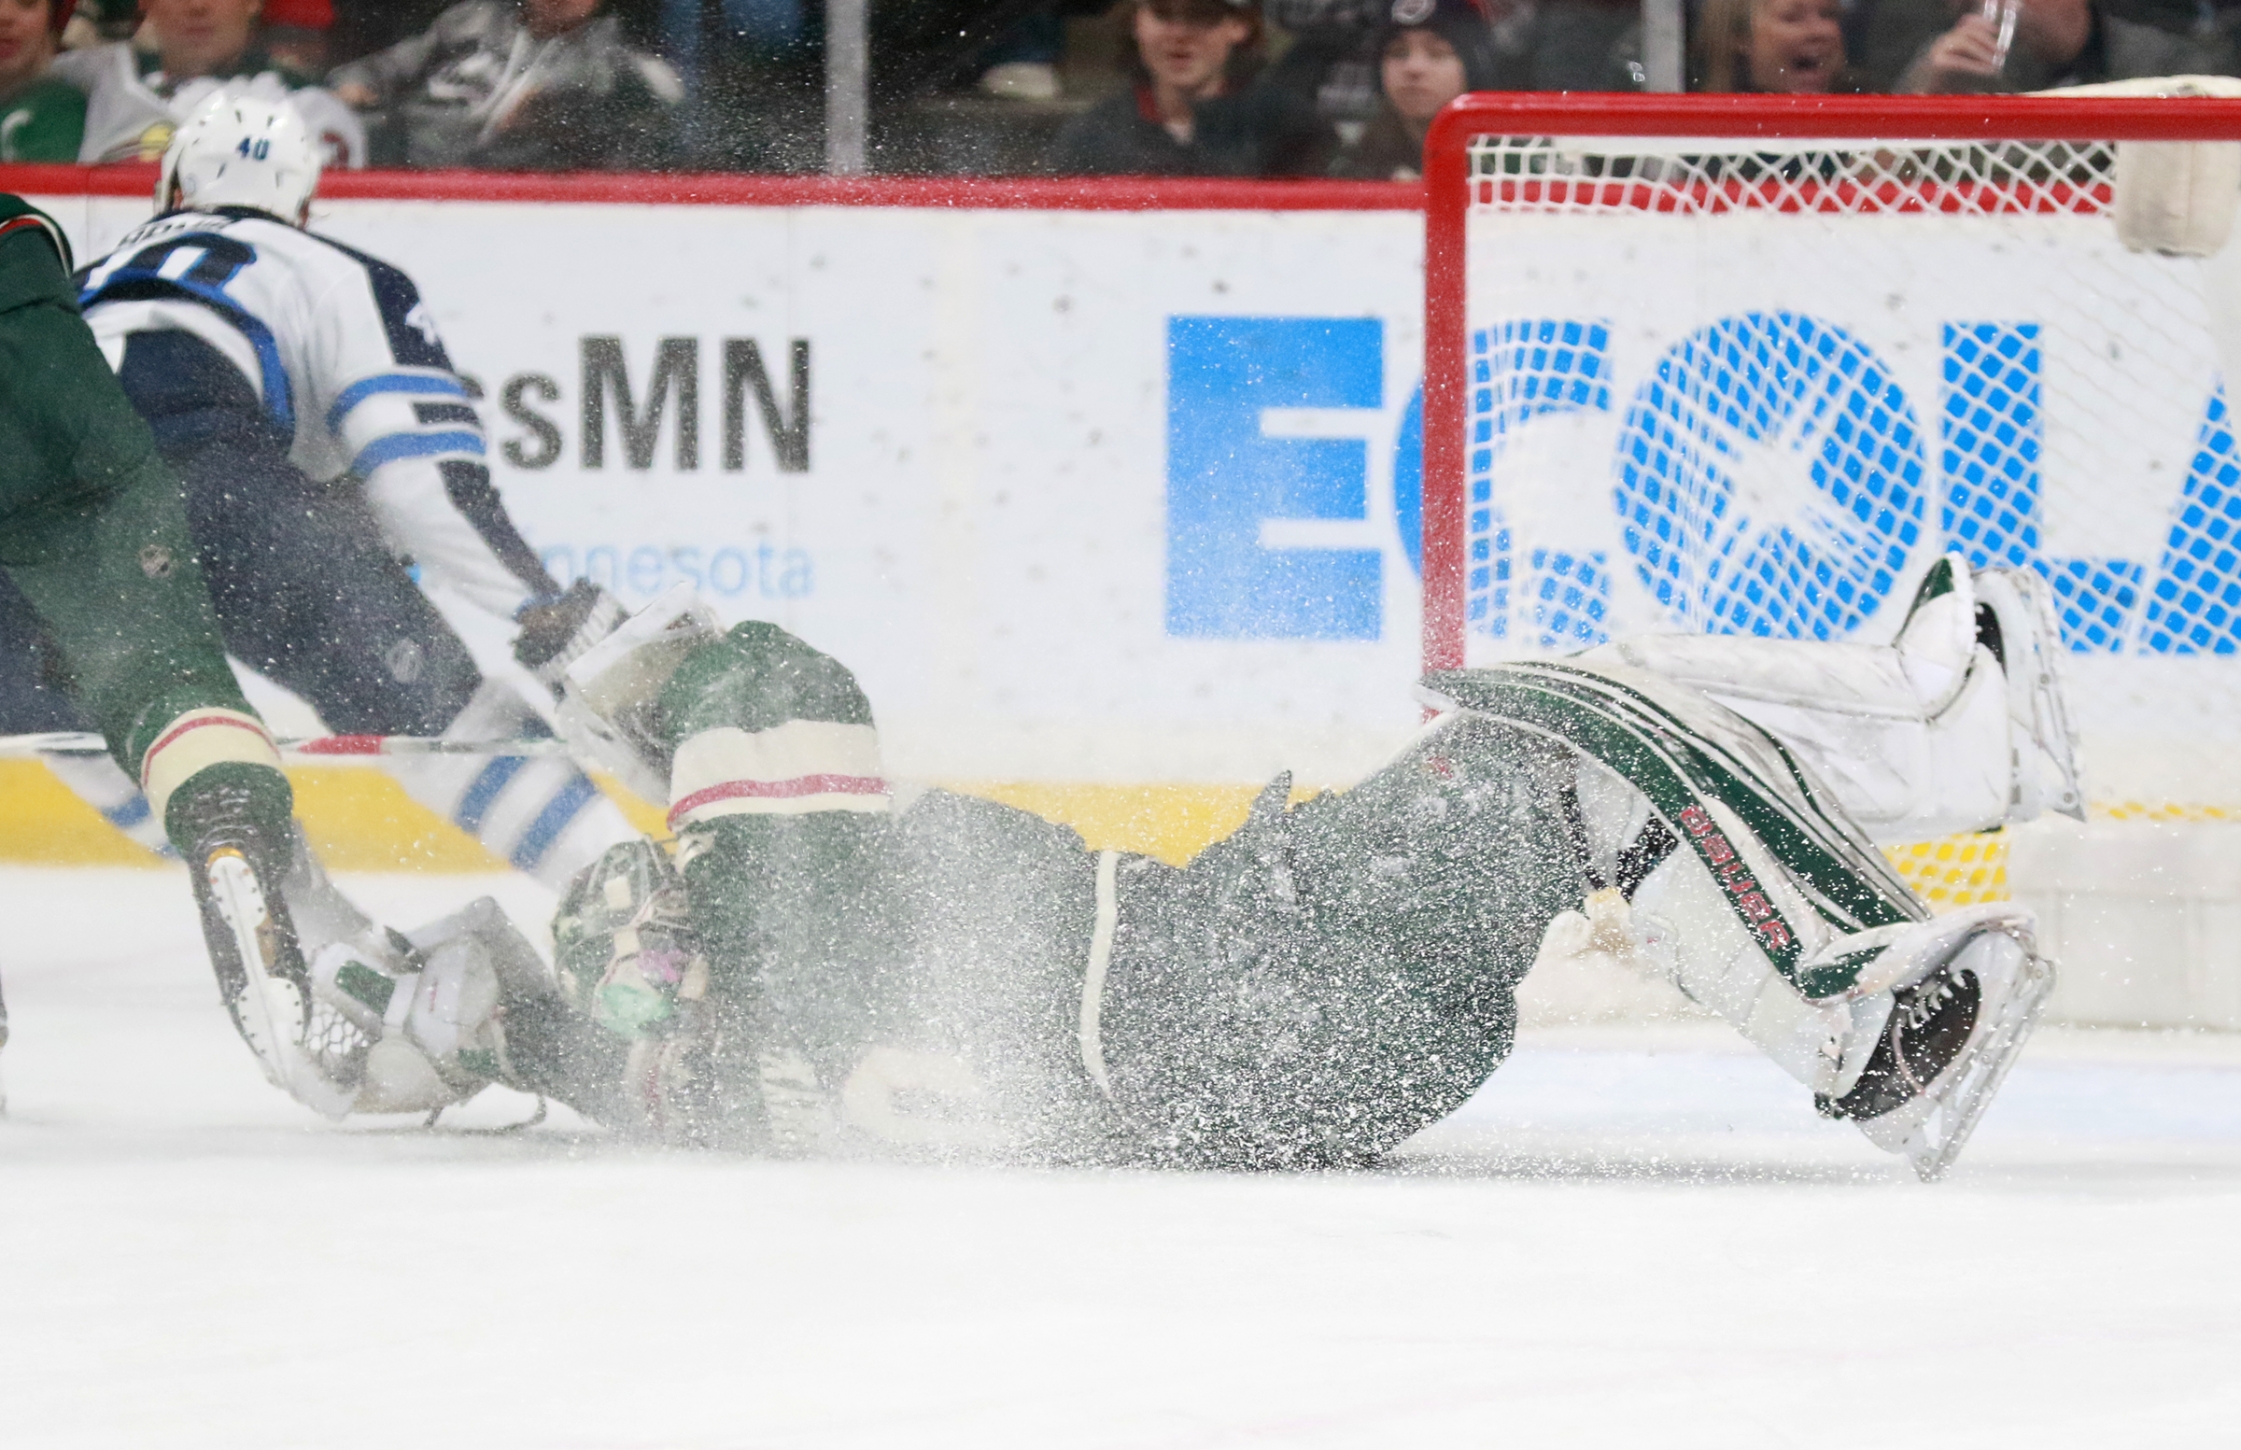 Wild goalie Devan Dubnyk went down to the ice to save a shot by the Winnipeg Jets' Joel Armia